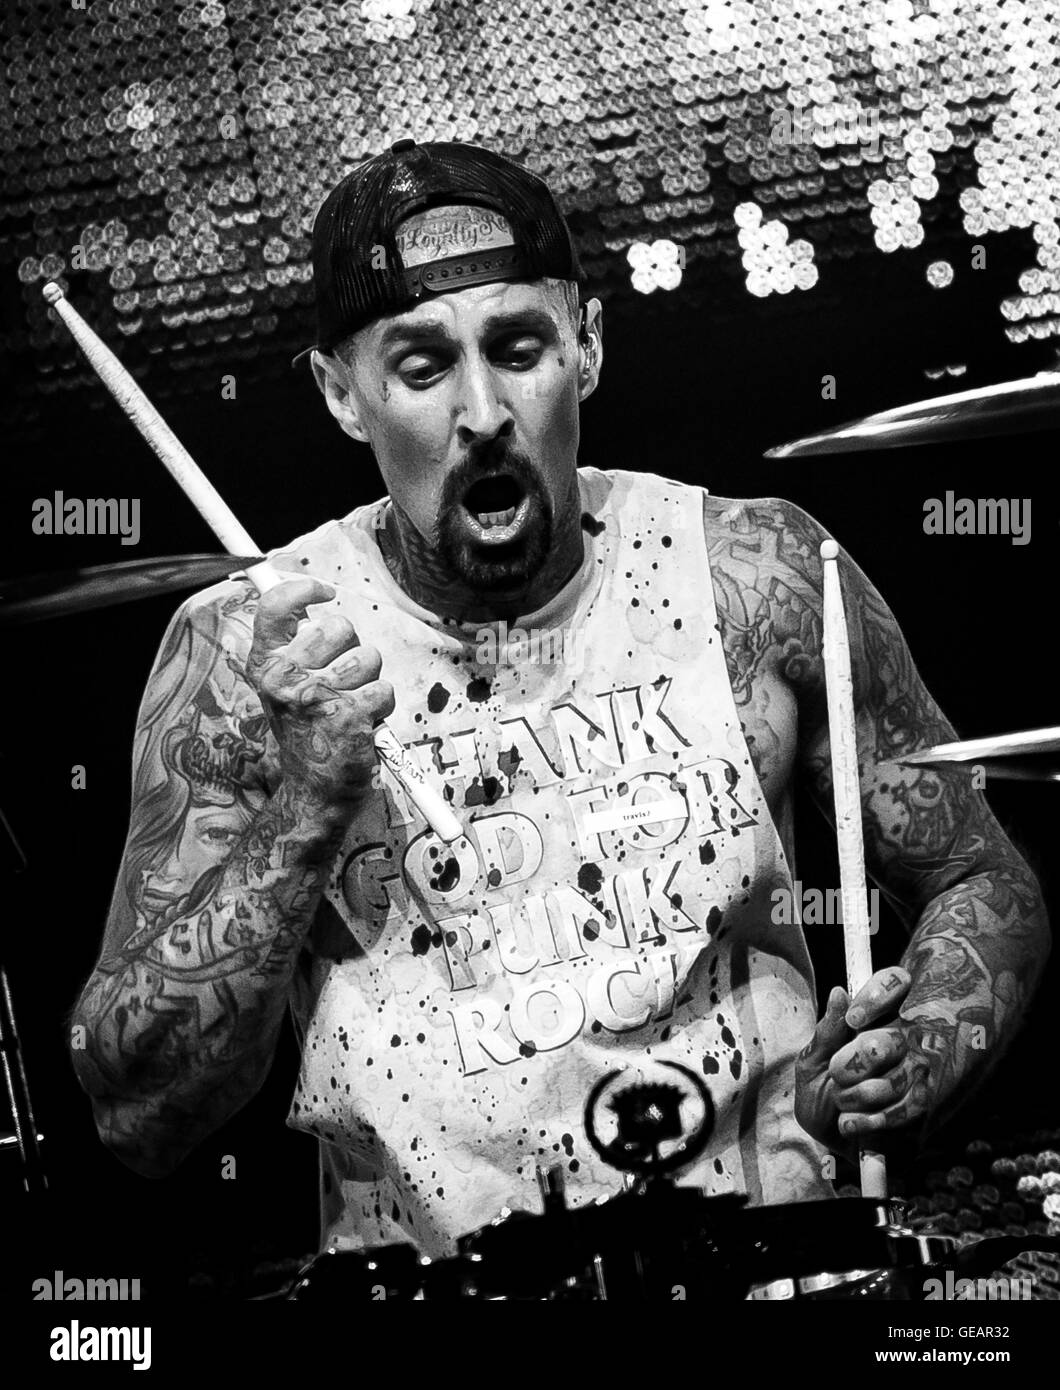 Travis live Black and White Stock Photos & Images - Alamy